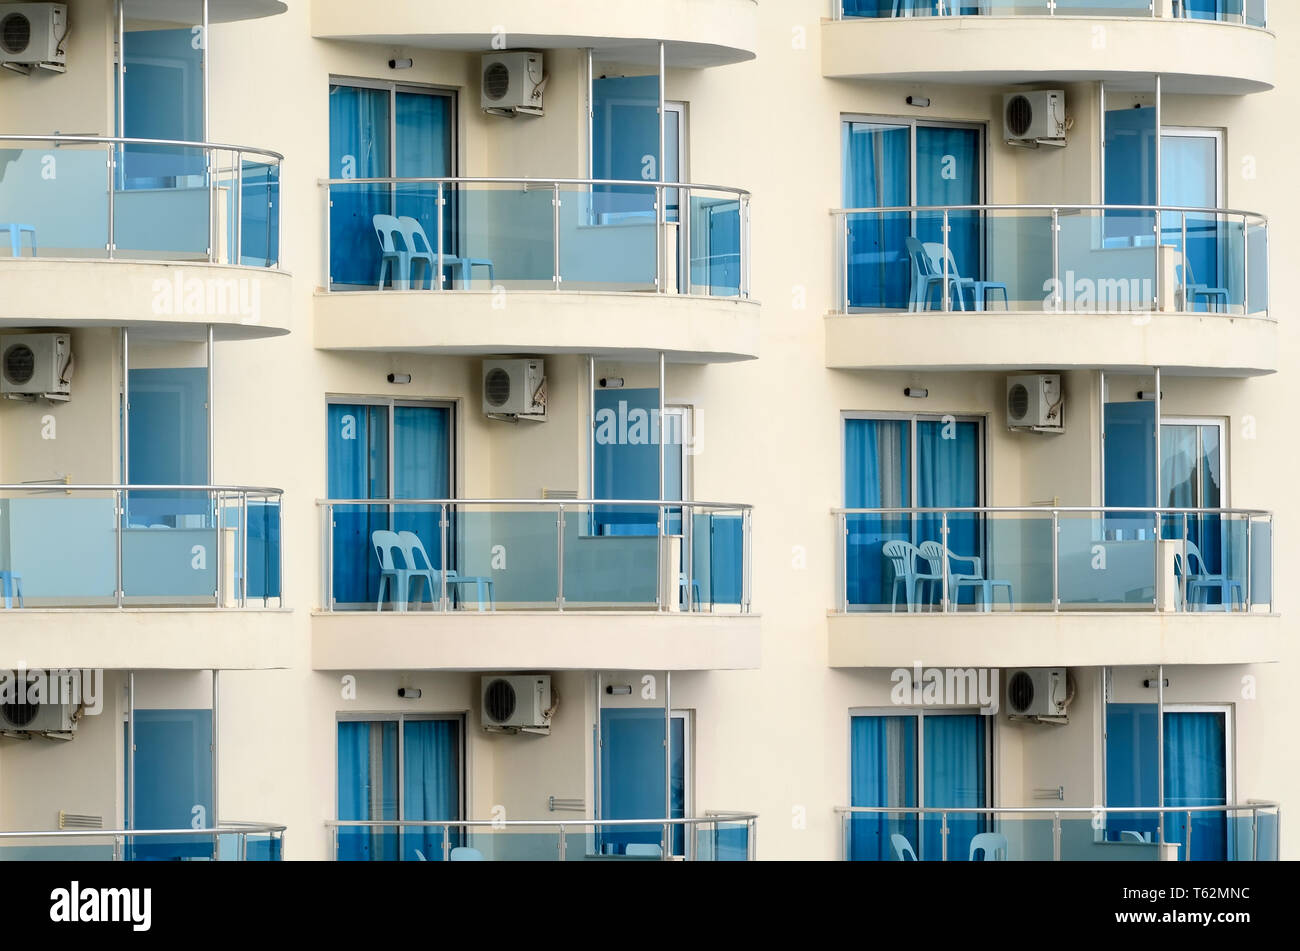 Standard balconies of a large hotel with plastic chairs on them Stock Photo